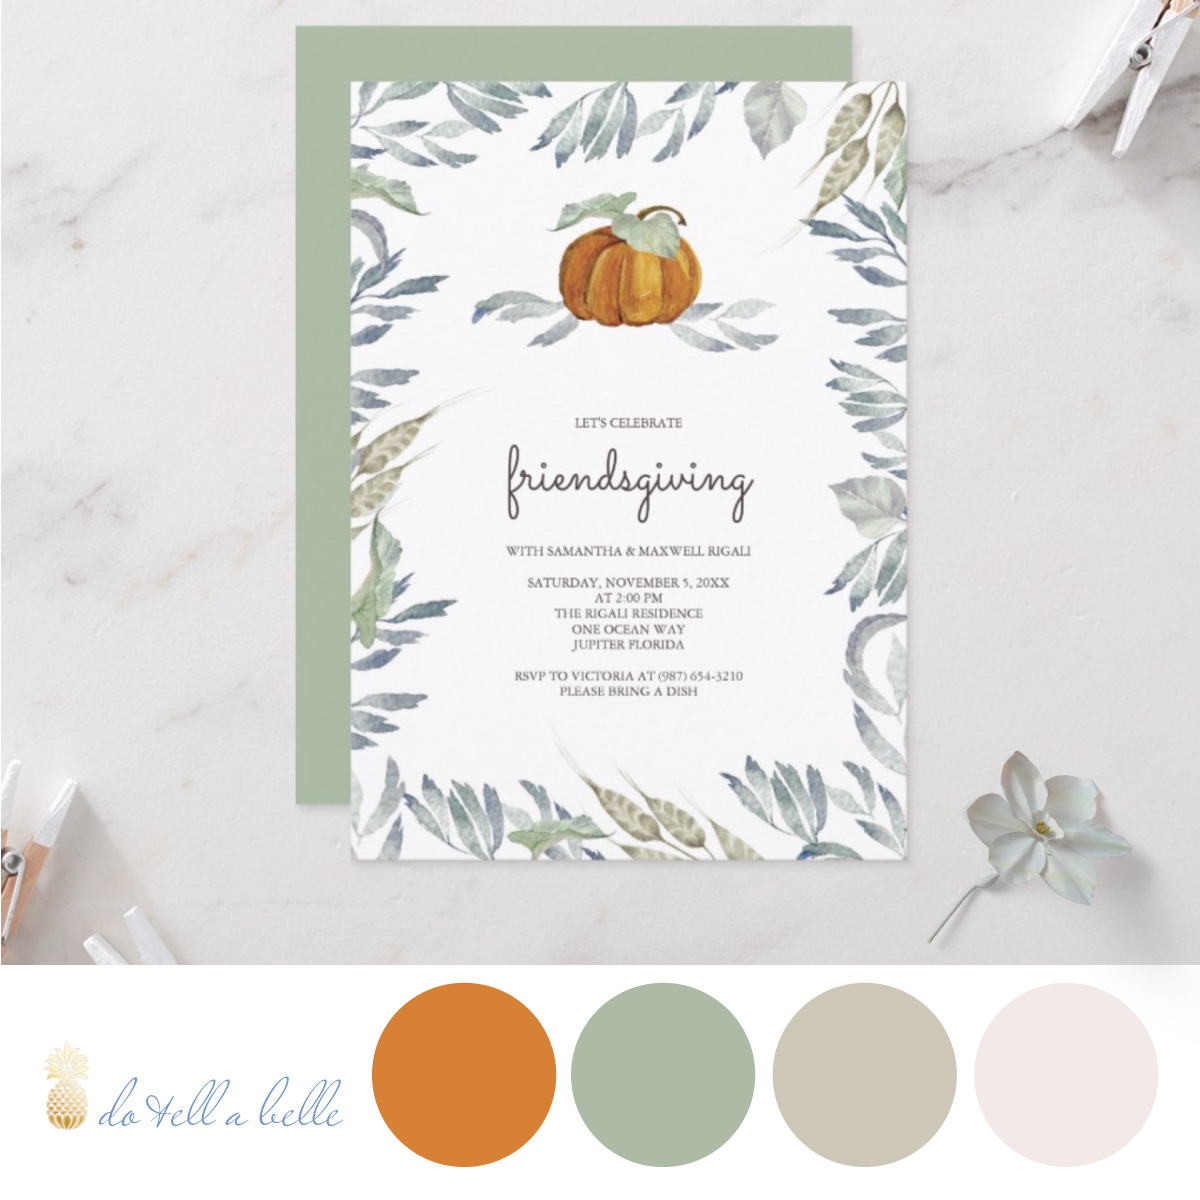 Botanical Pumpkin Stationery Suite by Victoria Grigaliunas of Do Tell a Belle